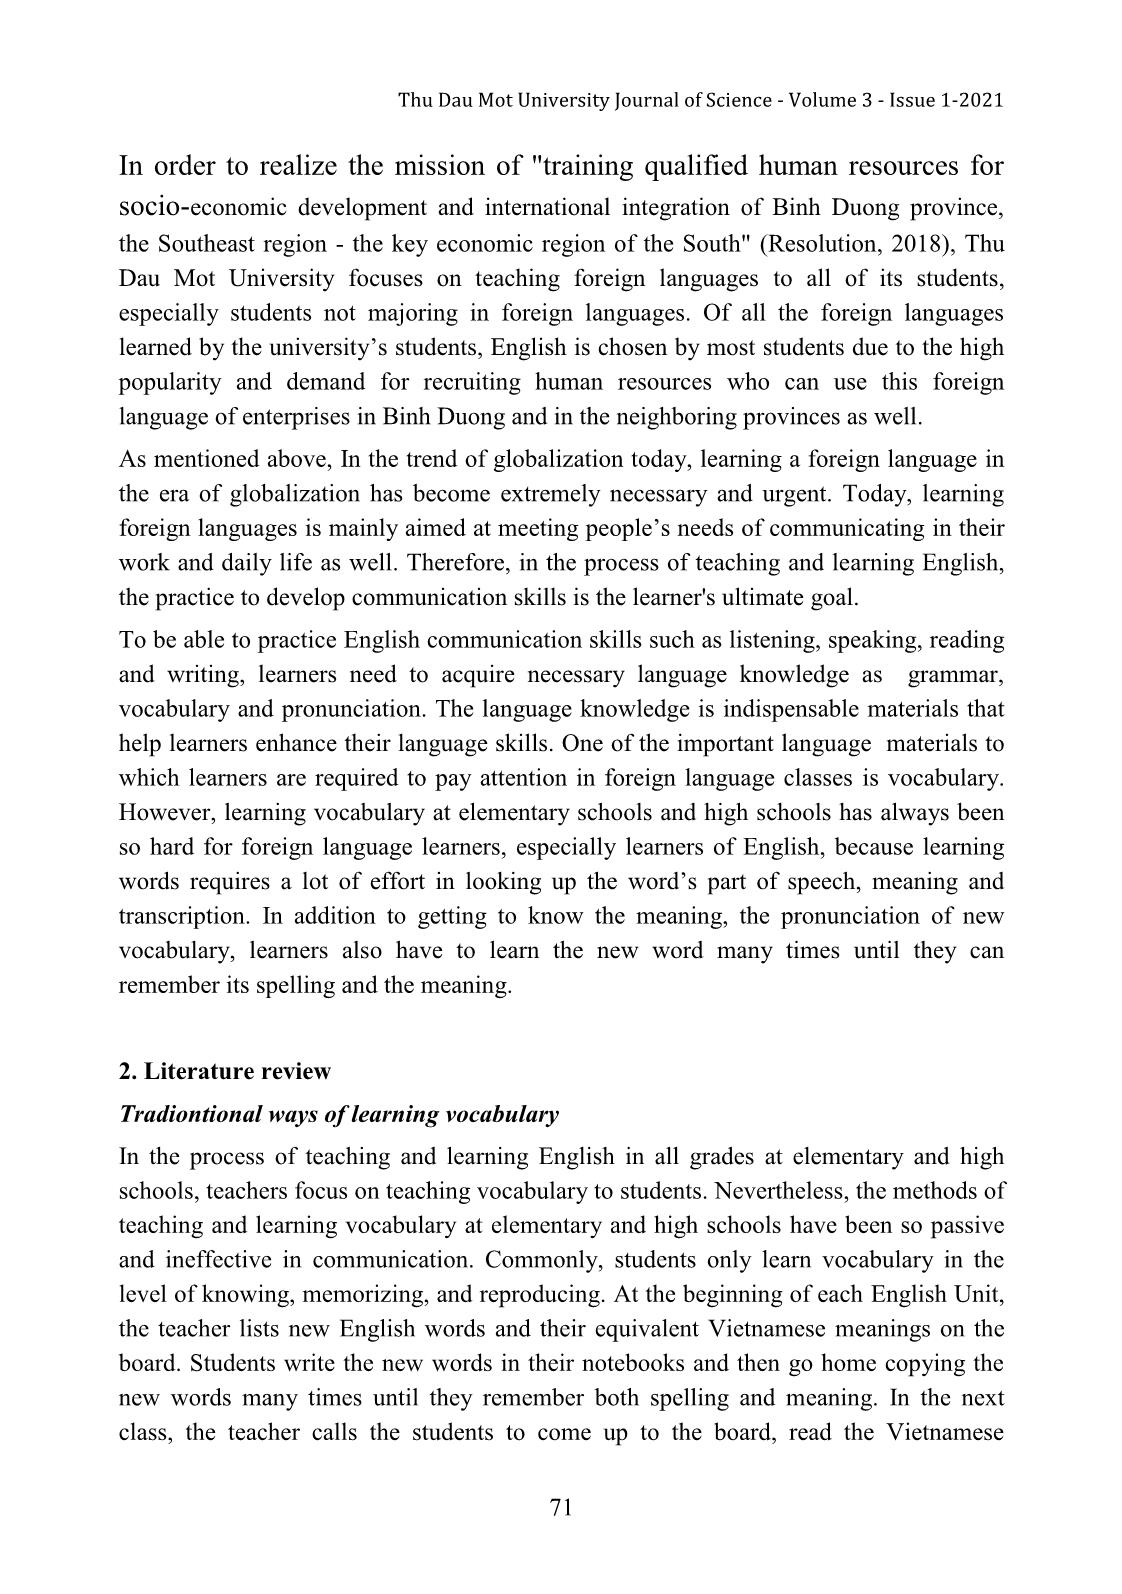 Applying morphology and contextual communication in learning English vocabulary trang 2